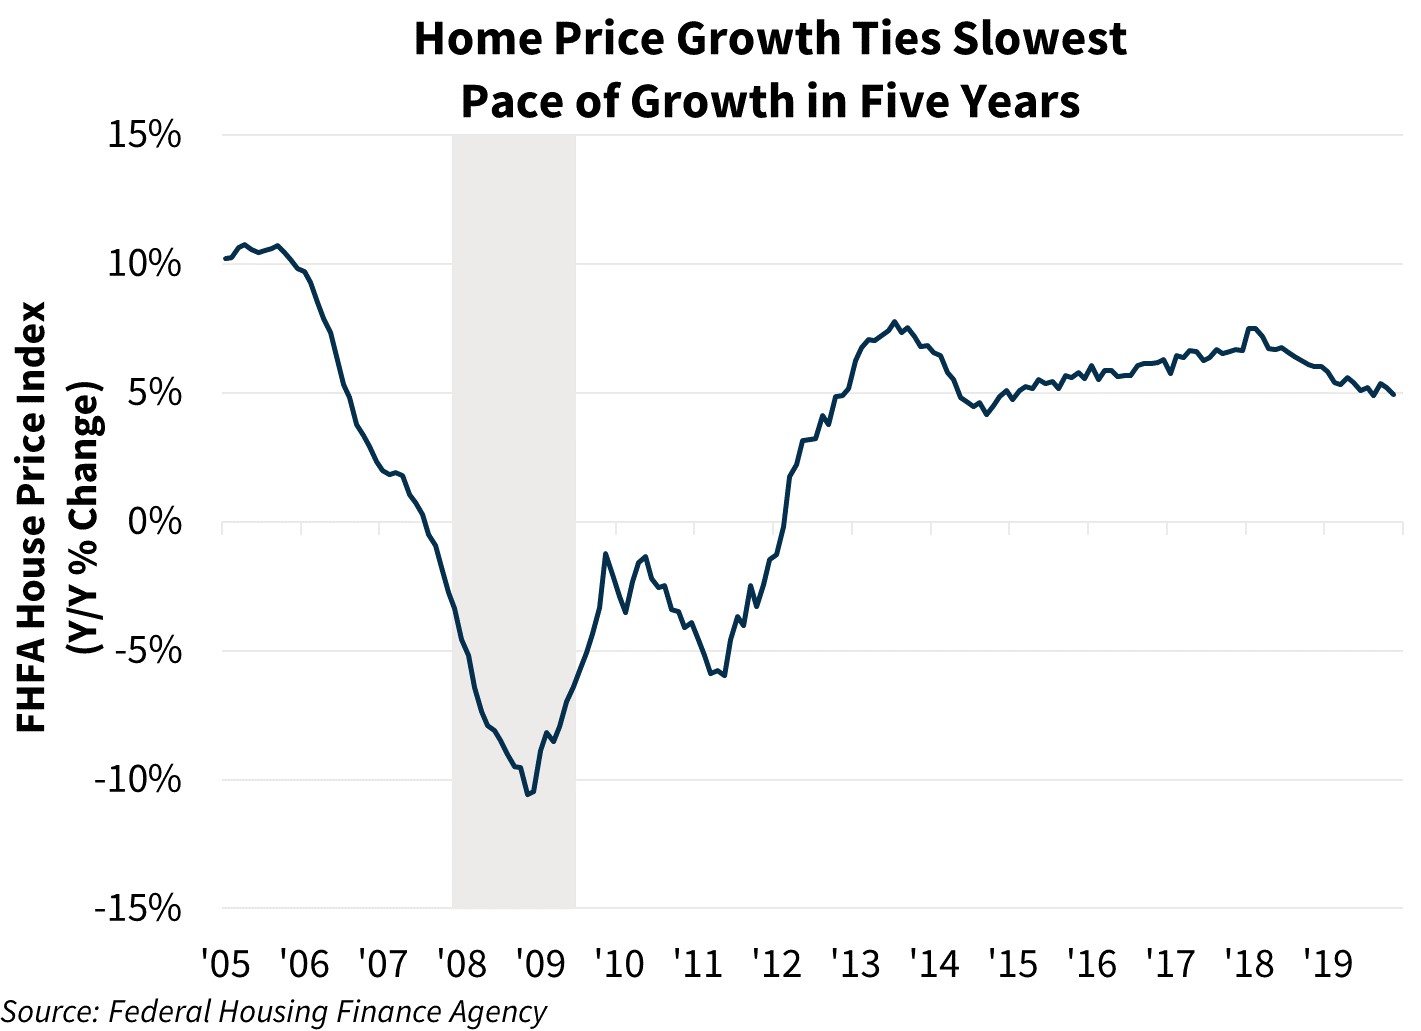 Home Price Growth Ties Slowest Pace of Growth in Five Years